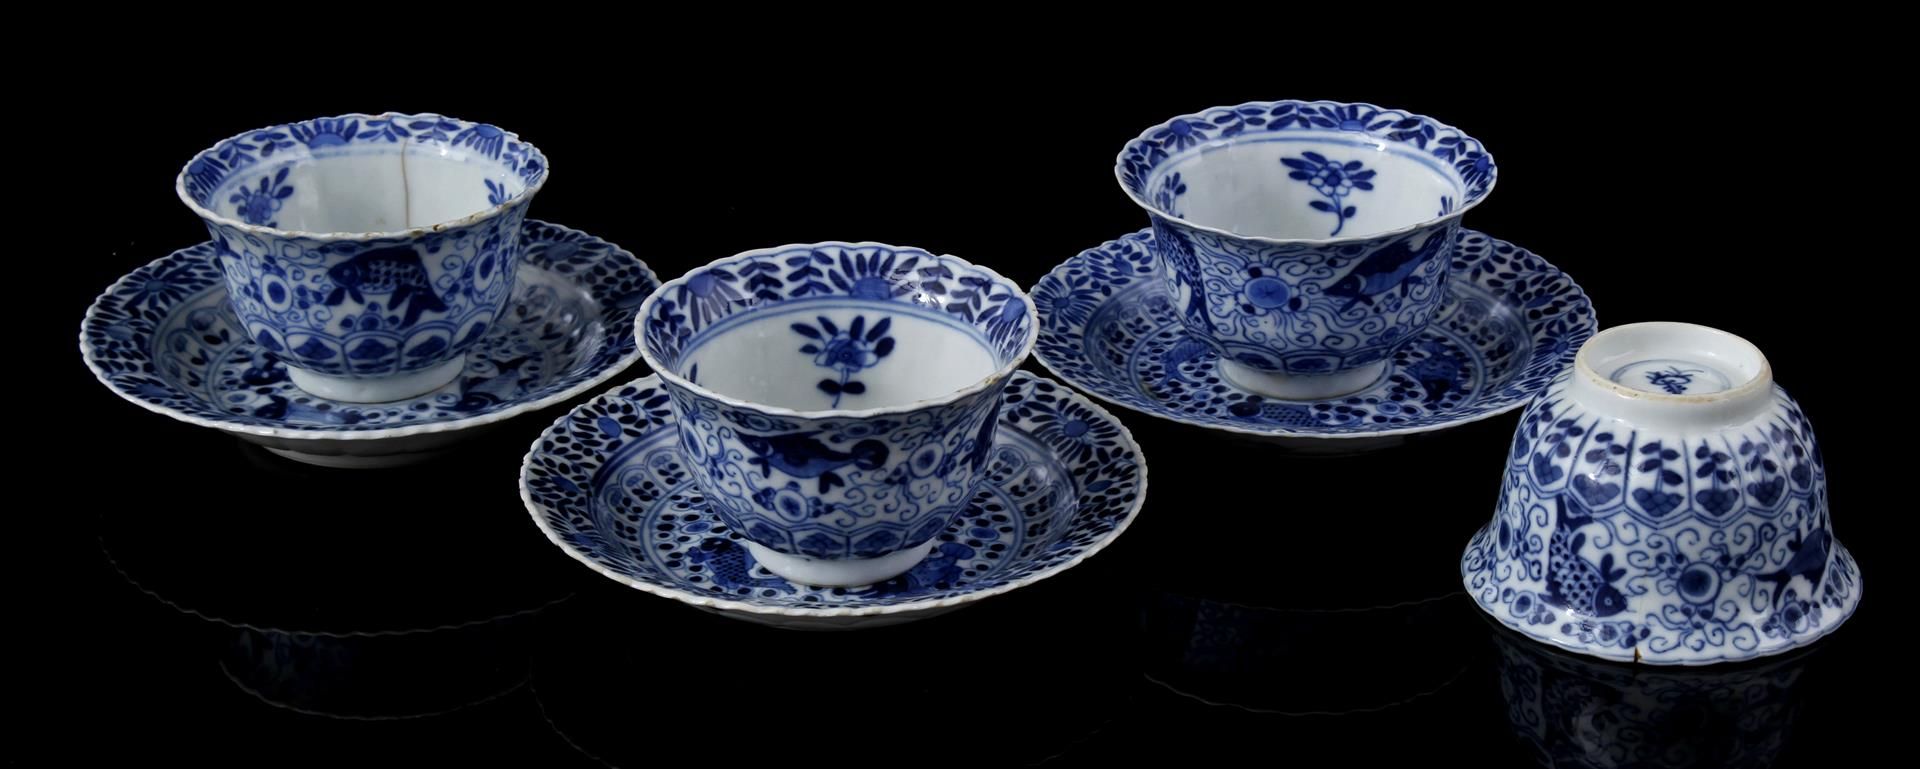 4 porcelain cups and 3 saucers, 19th century